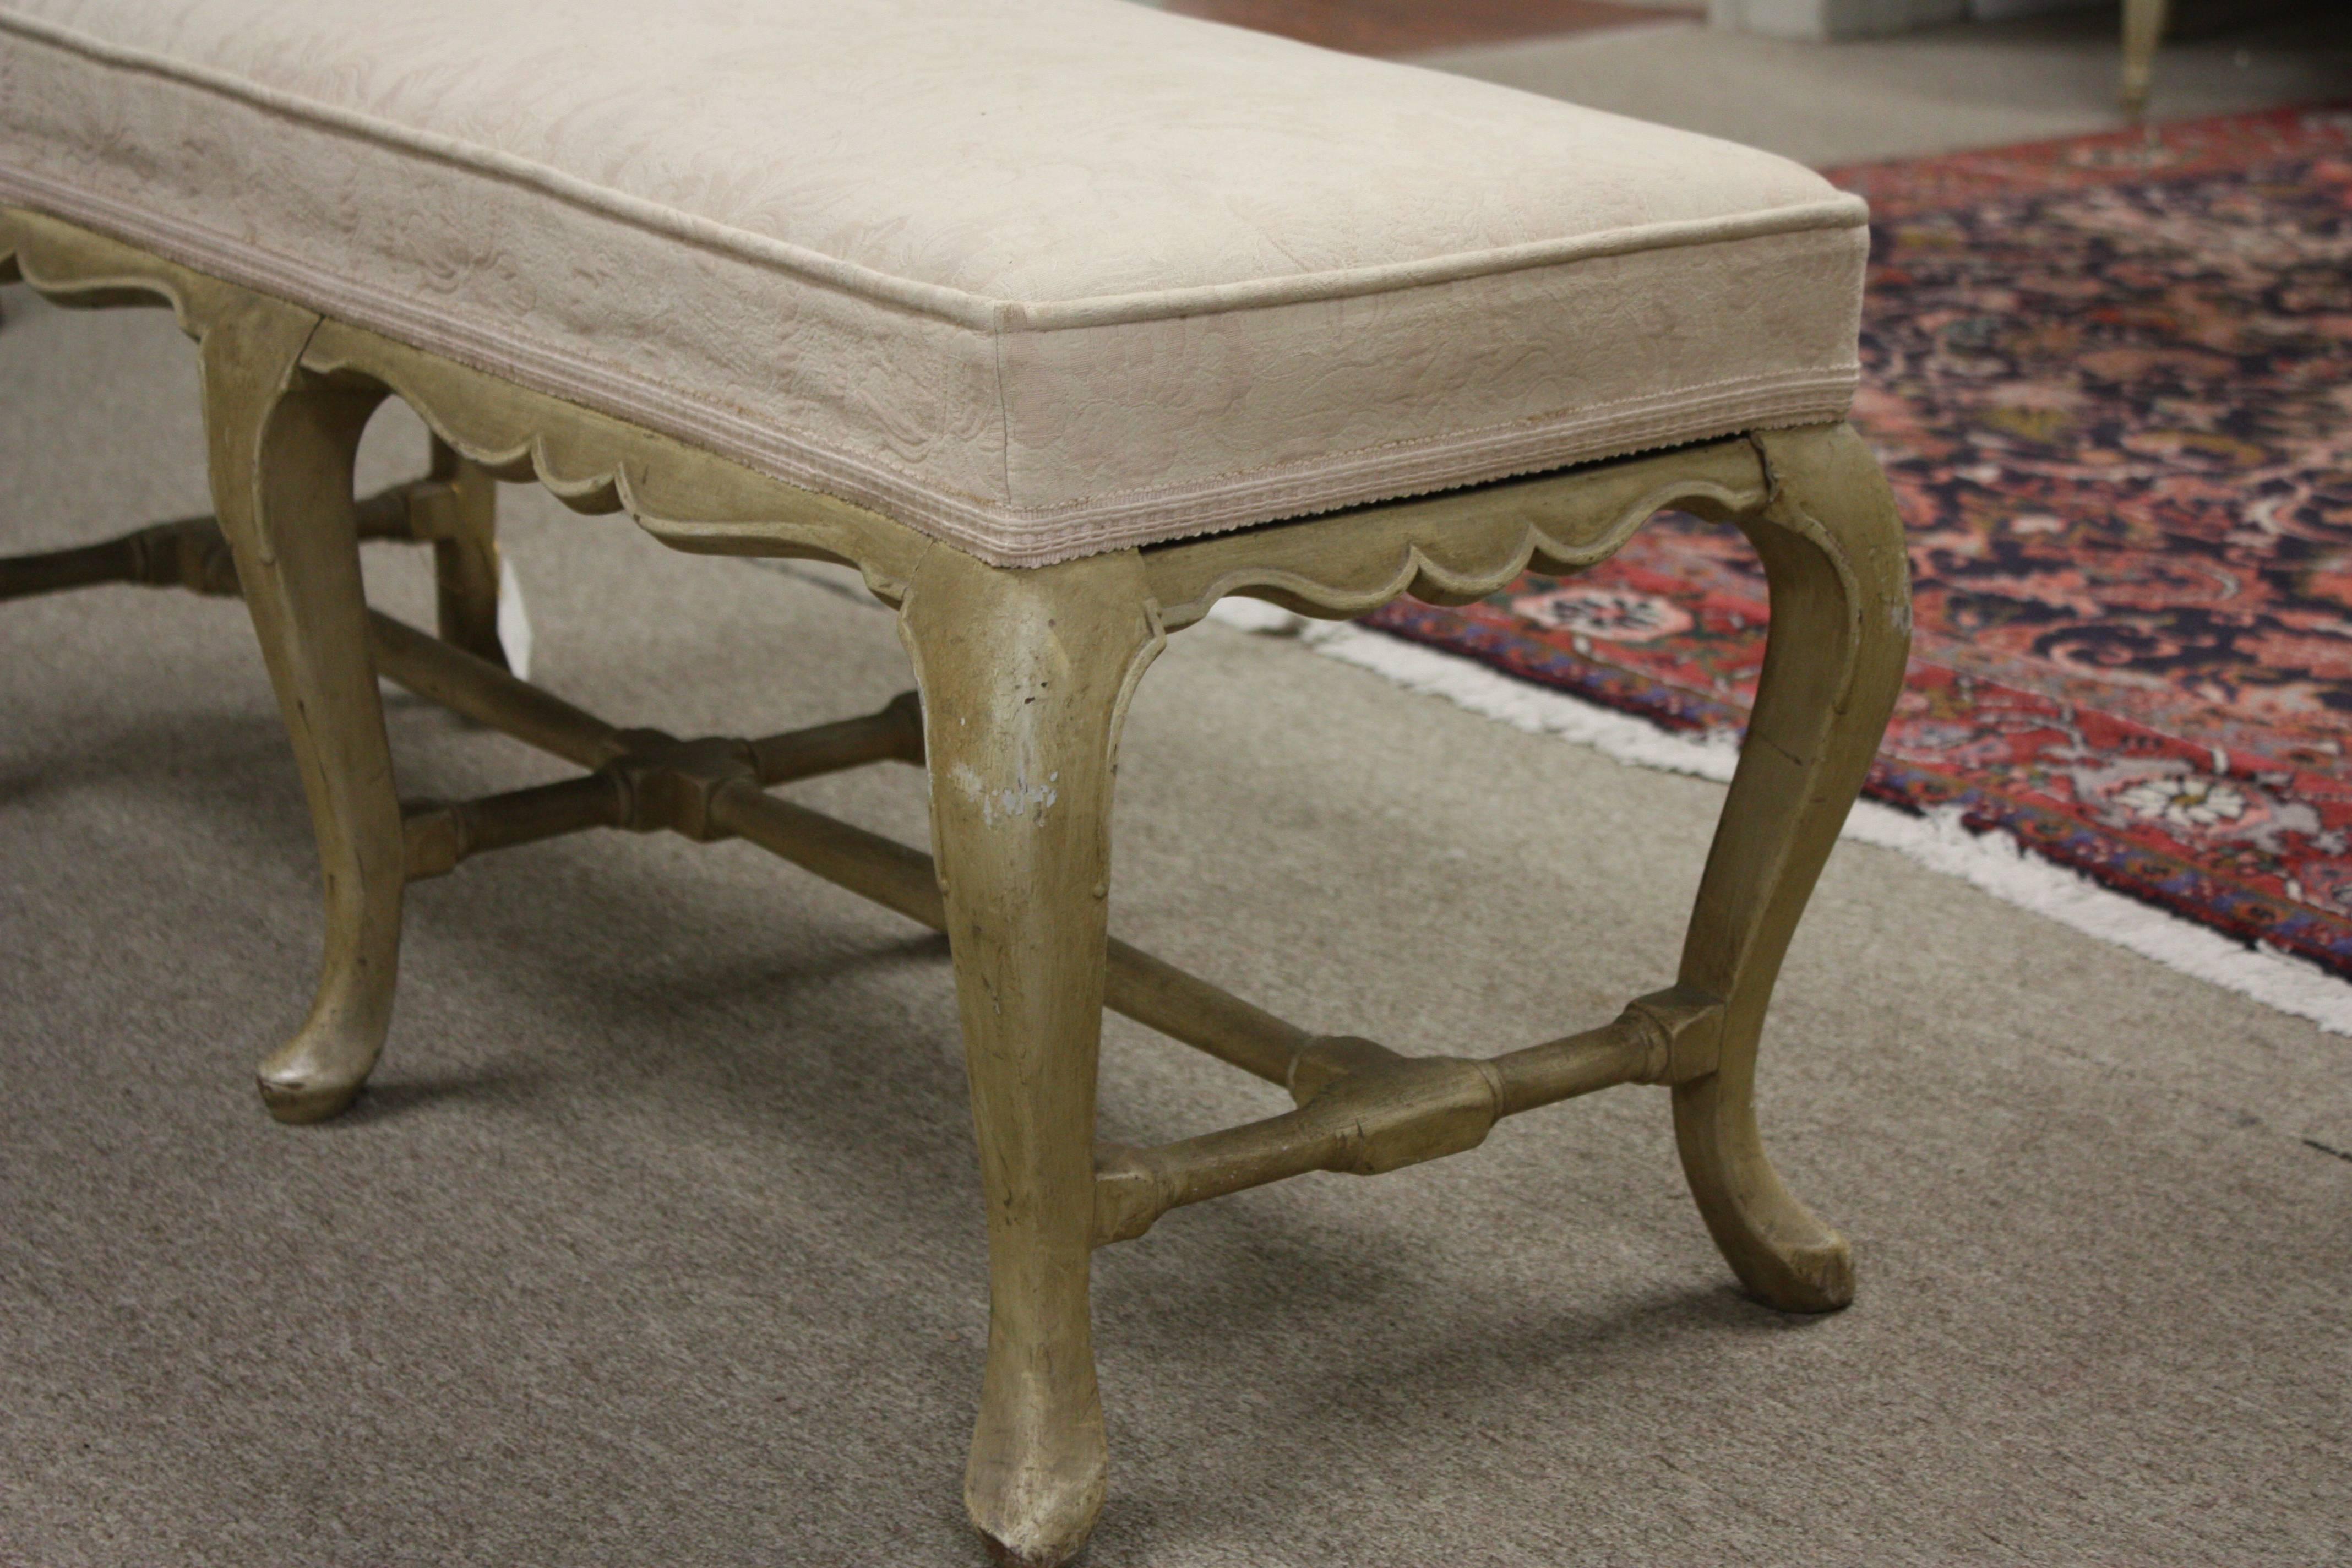 This attractive bench features the beautiful cabriole legs joined by stretchers that appeared during the early 18th century. Beautifully painted in a natural cream and simple lines makes this bench suitable for any decor.